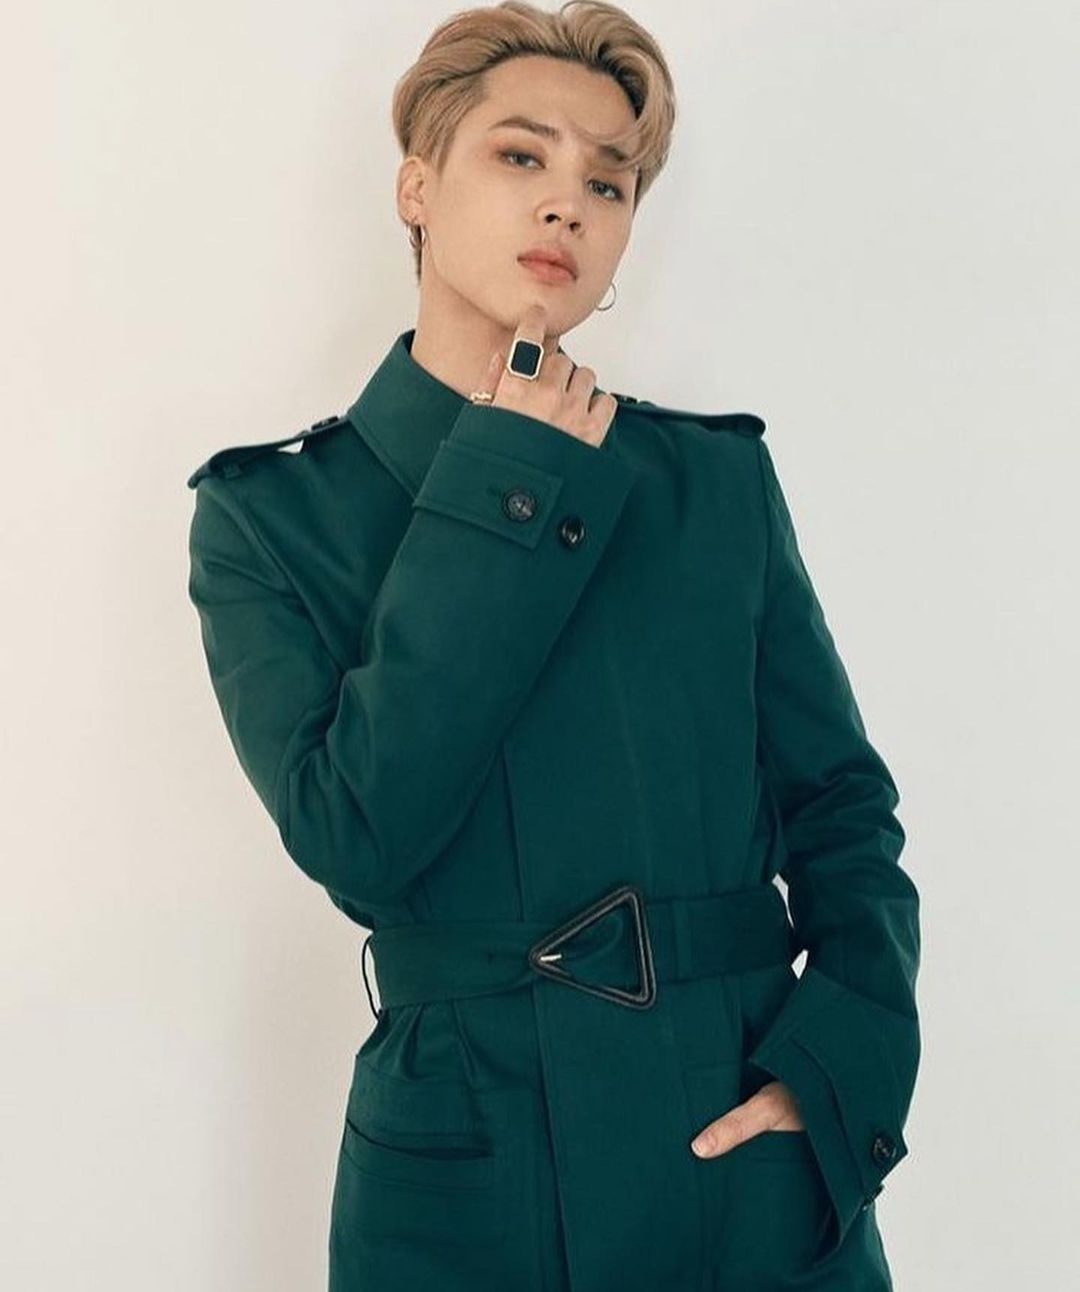 Jimin BTS - Biography, Profile, Facts, and Career